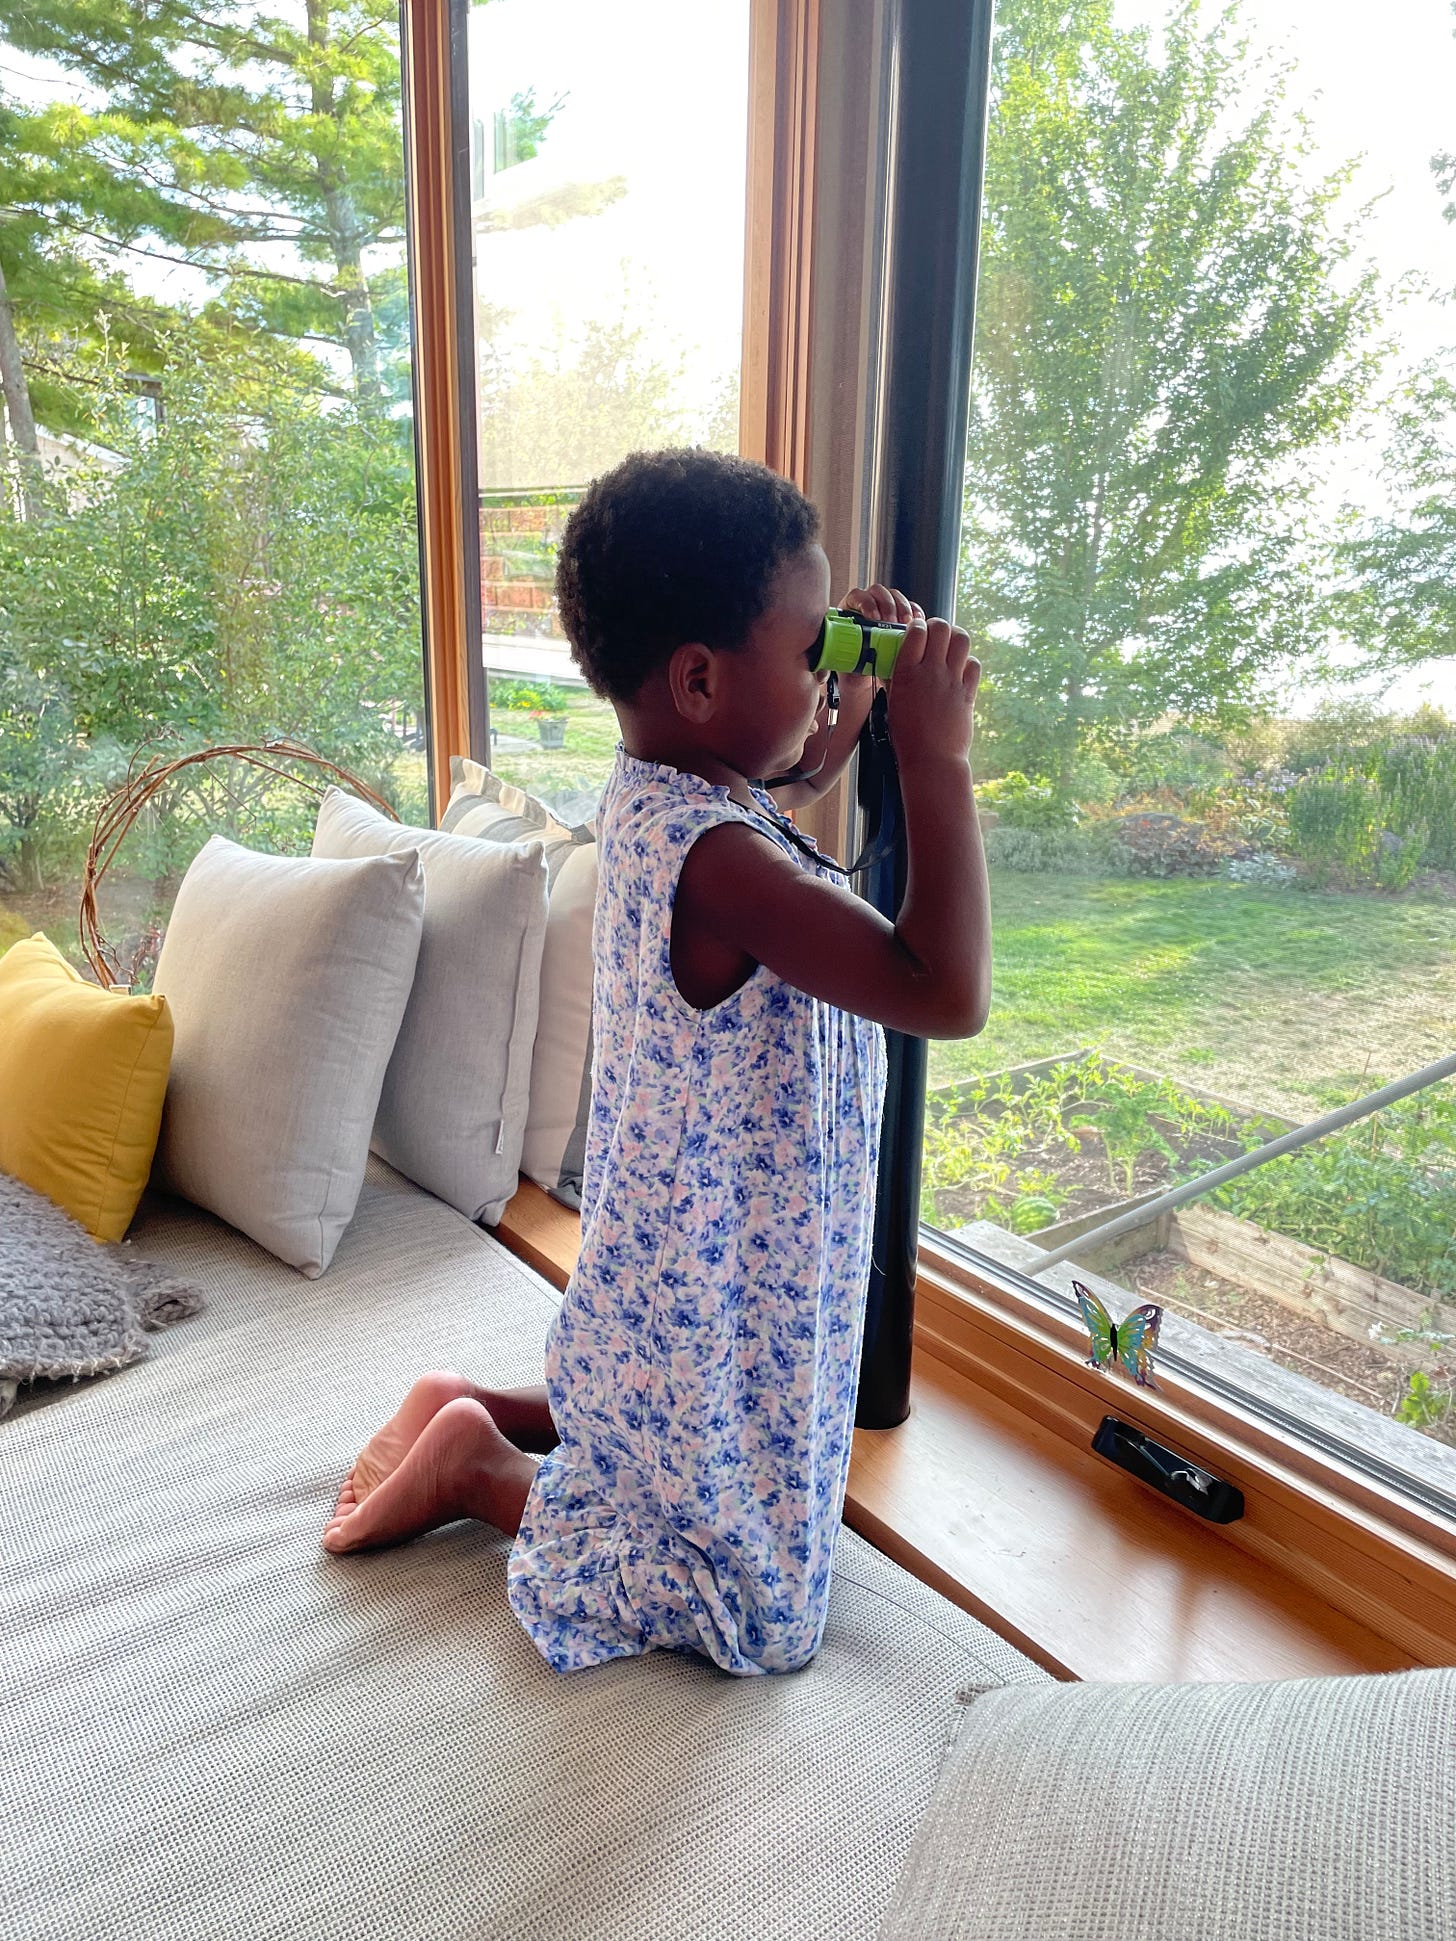 a Black kid in a long floral nightgown looks out the window with binoculars